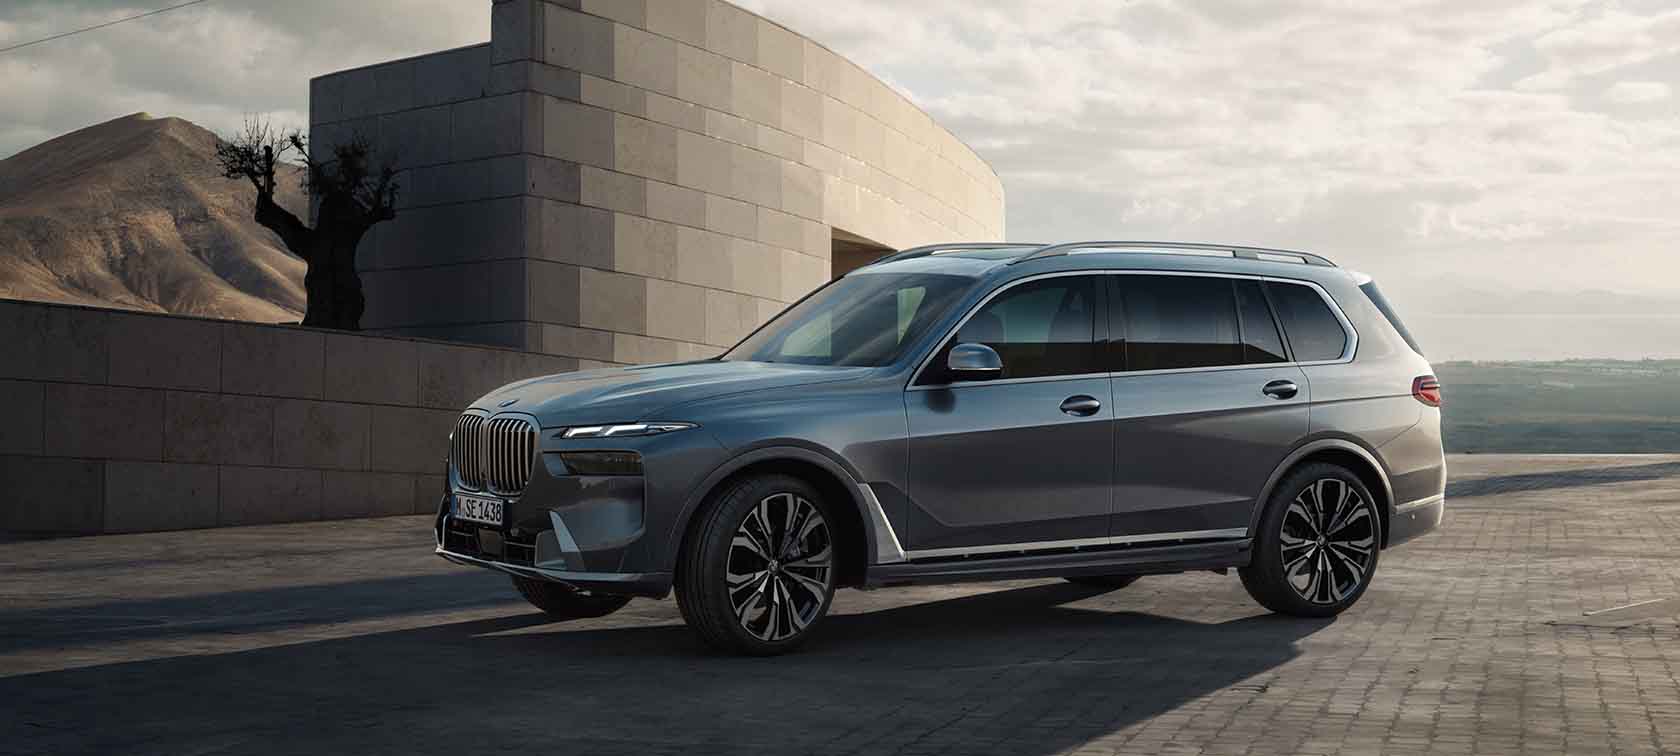 BMW X7 (G07): Models, technical Data & Prices | BMW.com.ge